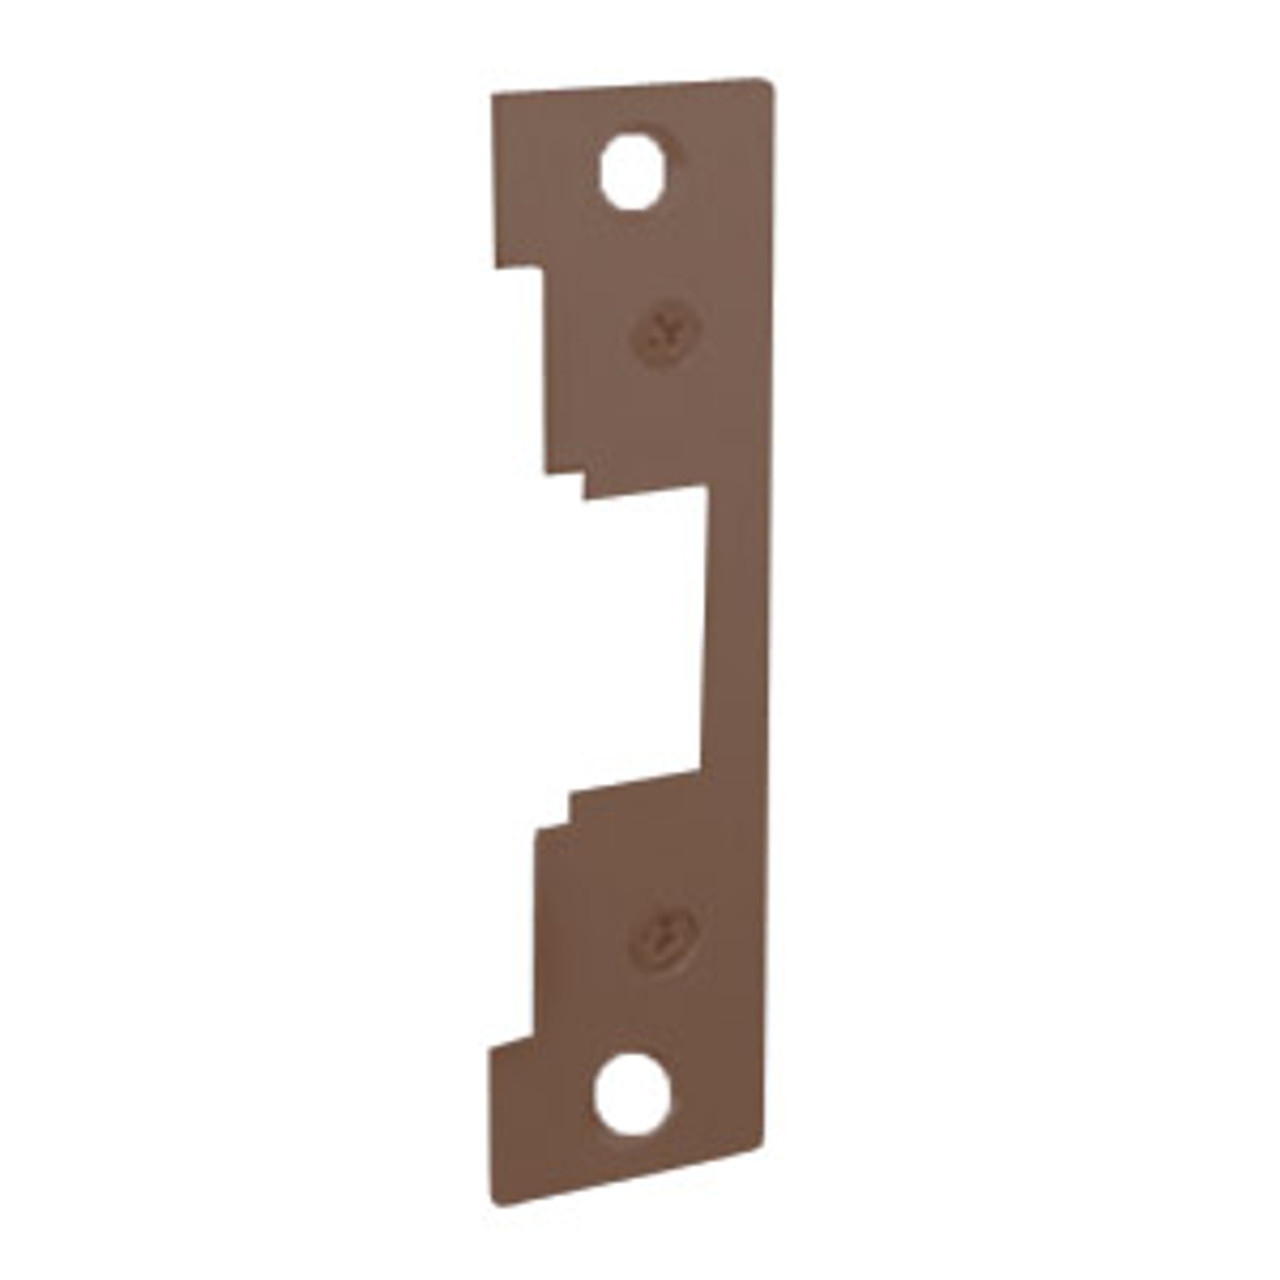 792-613E Hes 7-15/16 x 1-7/16" Faceplate in Brown Nylon Powder Coated Finish